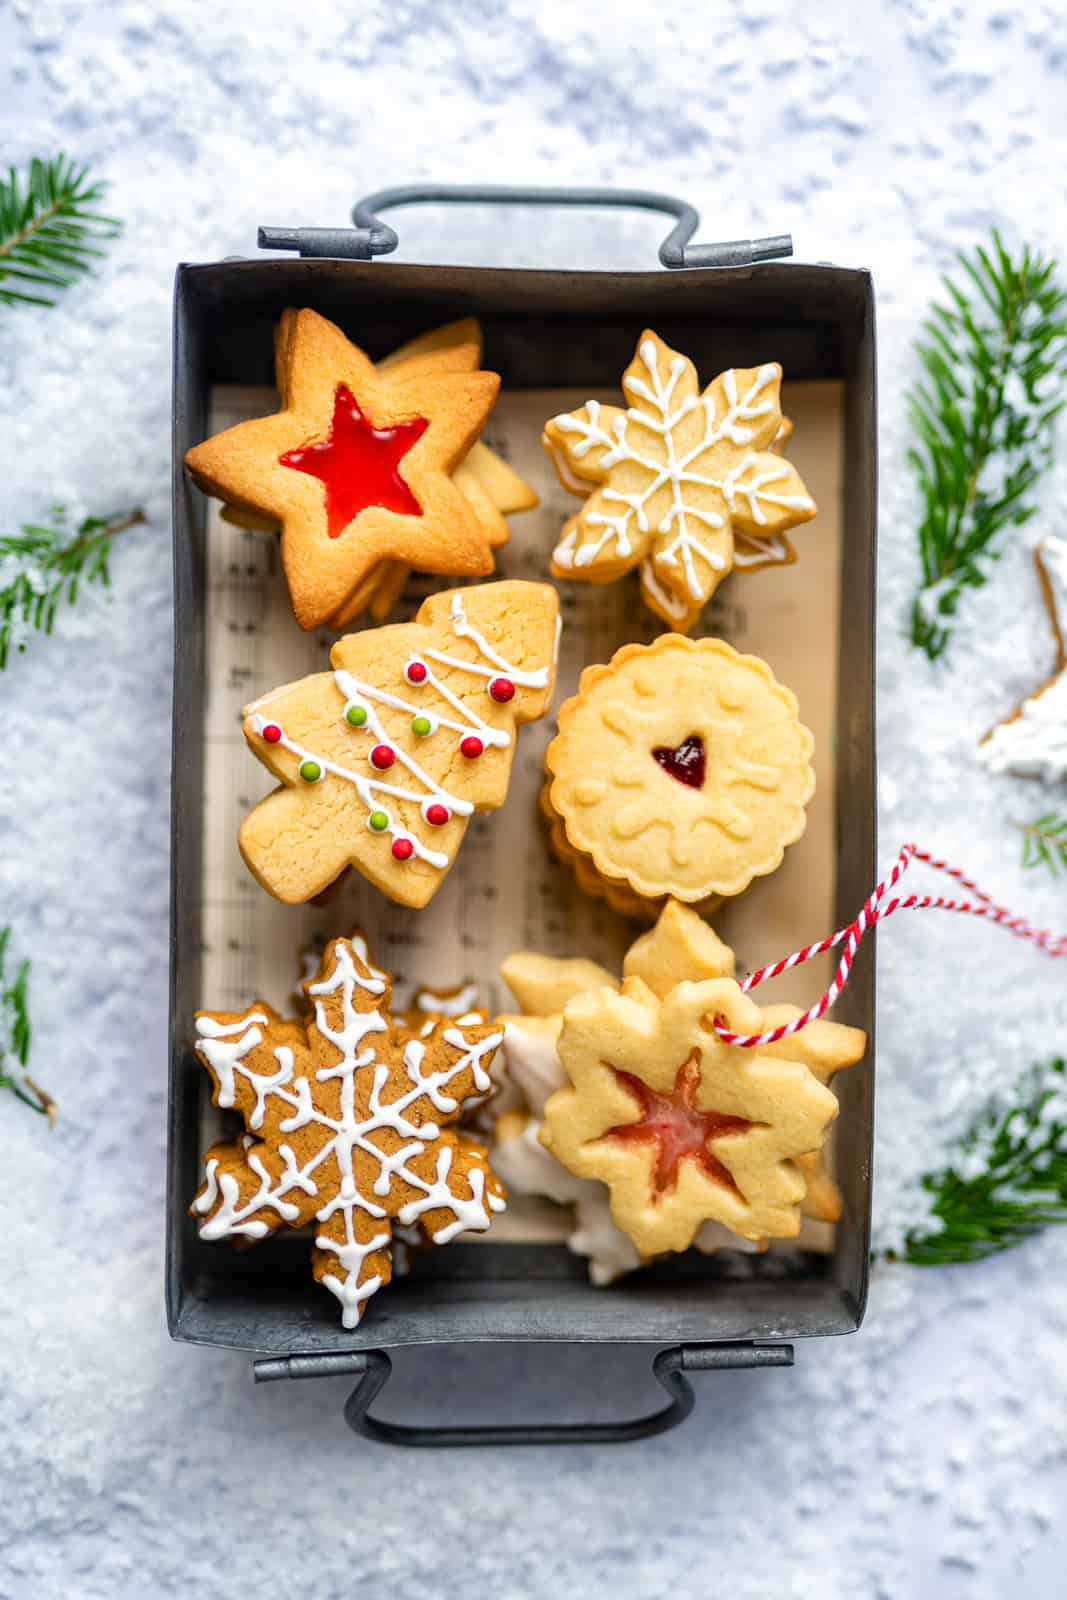 Assortment of festive Christmas cookies including gingerbread cookies, sugar cookies and stained glass cookies